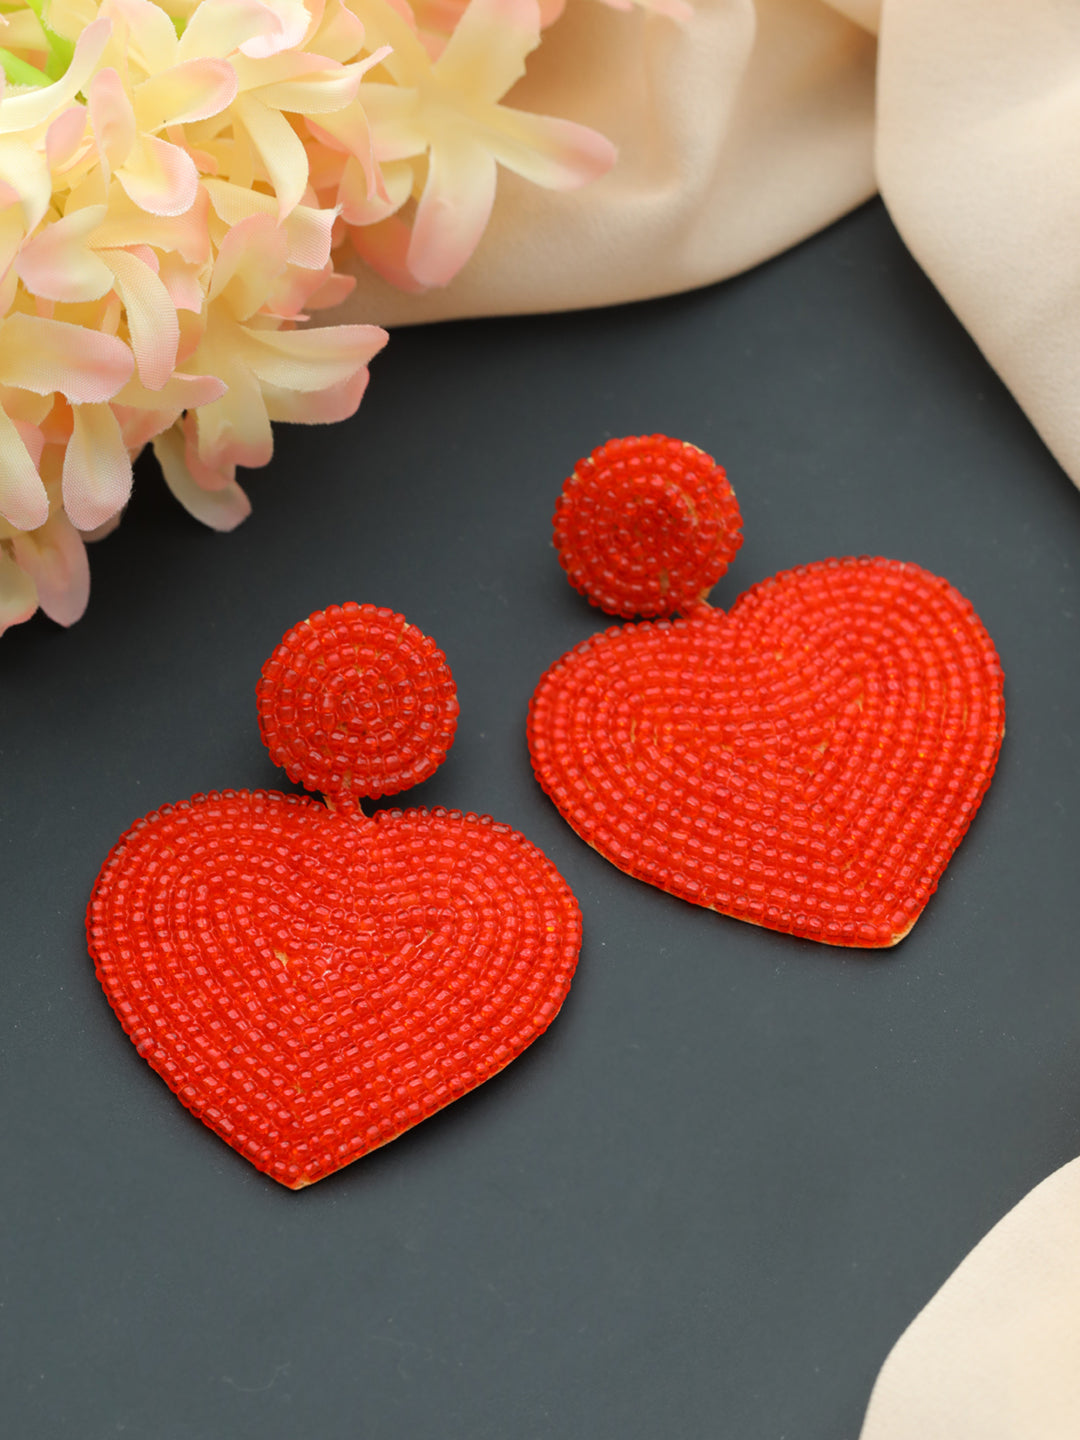 Handwoven Beads & Red Heart Shaped Contemporary Design Handcrafted Drop Earrings